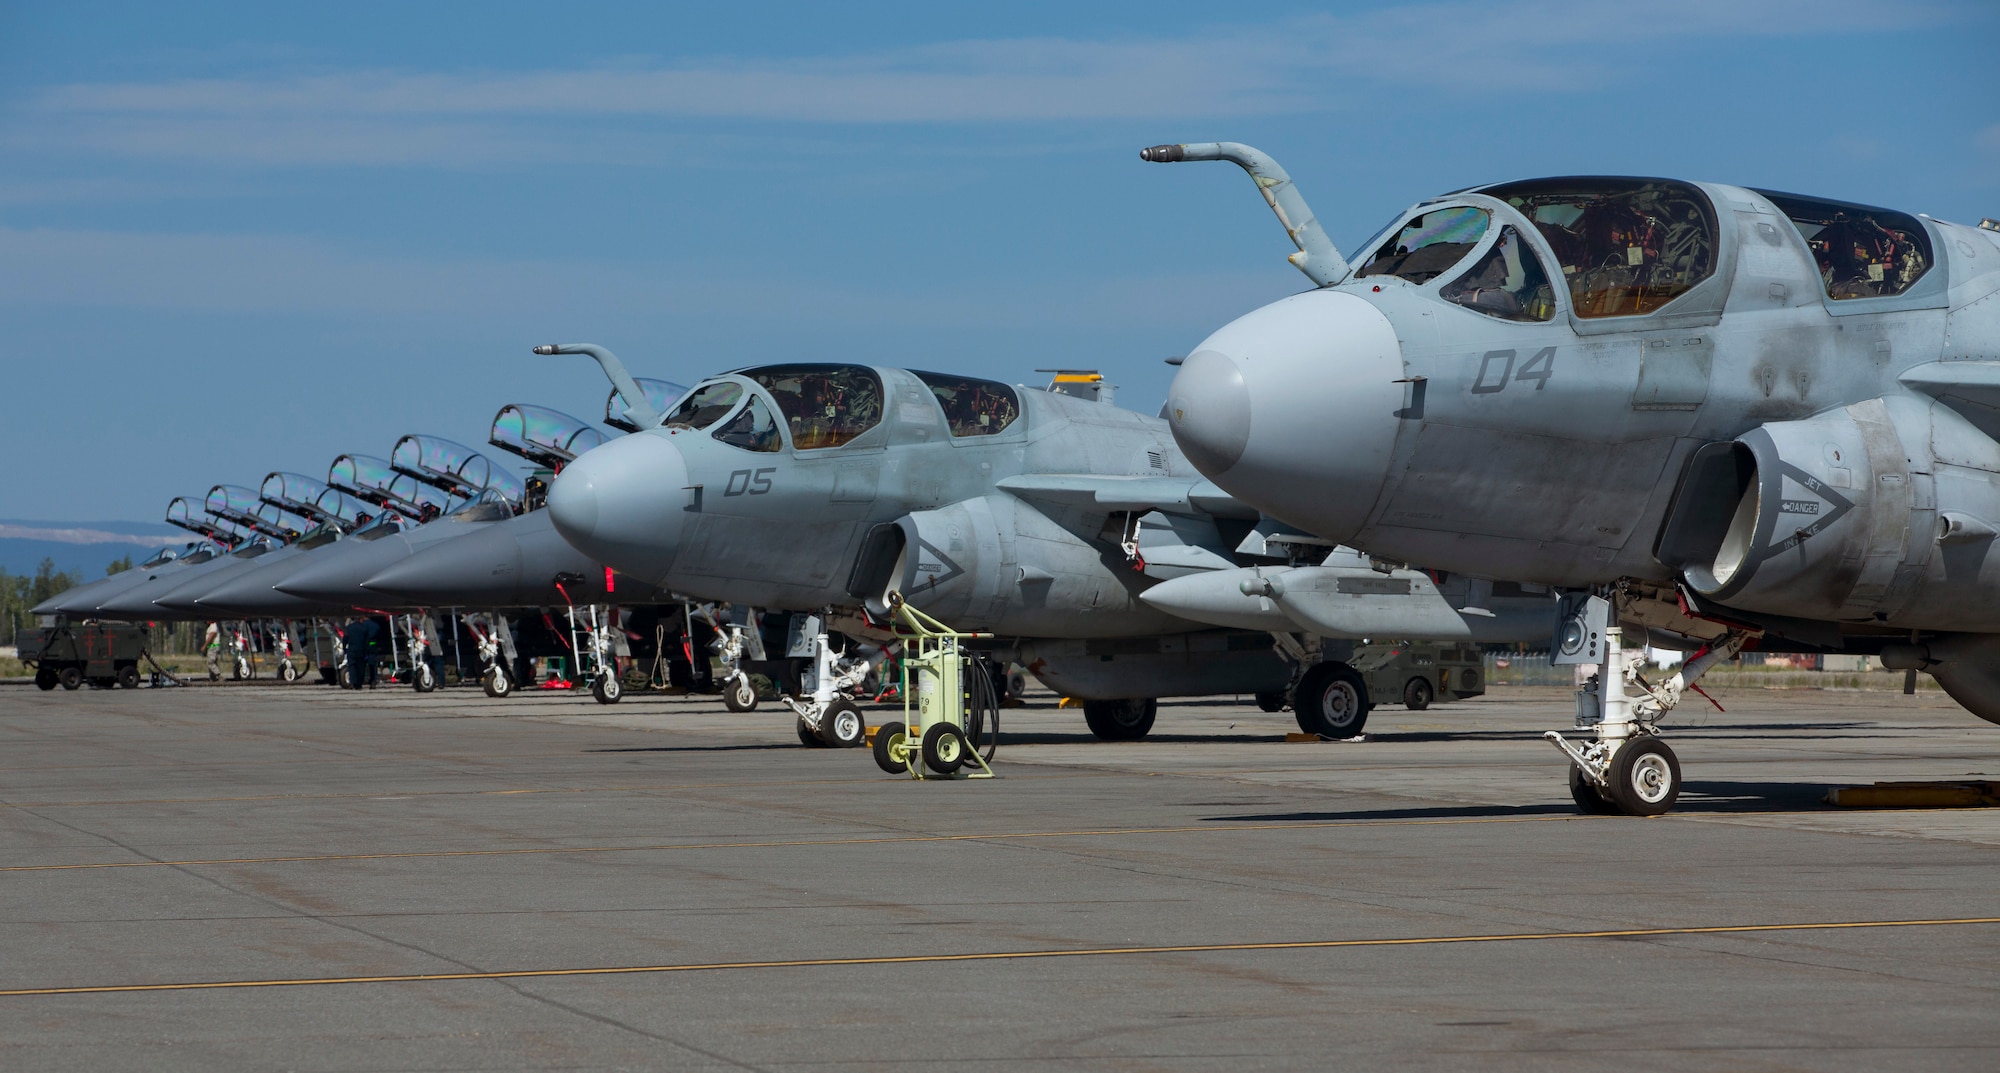 U.S. Marine Corps EA-6B Prowler aircrafts assigned to Marine Tactical Electronic Warfare Squadron 2, 2nd Marine Aircraft Wing and U.S. Air Force F-15E Strike Eagle aircrafts assigned to the 4th Fighter Wing, Seymour Johnson Air Force Base, North Carolina, sit on the flight line during Exercise Northern Edge 15 at Eielson Air Force Base, Alaska, June 15, 2015. Northern Edge is Alaska’s premier joint training exercise designed to practice operations, techniques and procedures as well as enhance interoperability among the services. Thousands of participants from all services, Airmen, Soldiers, Sailors, Marines and Coast Guardsmen from active duty, Reserve and National Guard units are involved. (U.S. Marine Corps photo by Cpl. Suzanne Dickson/Released)